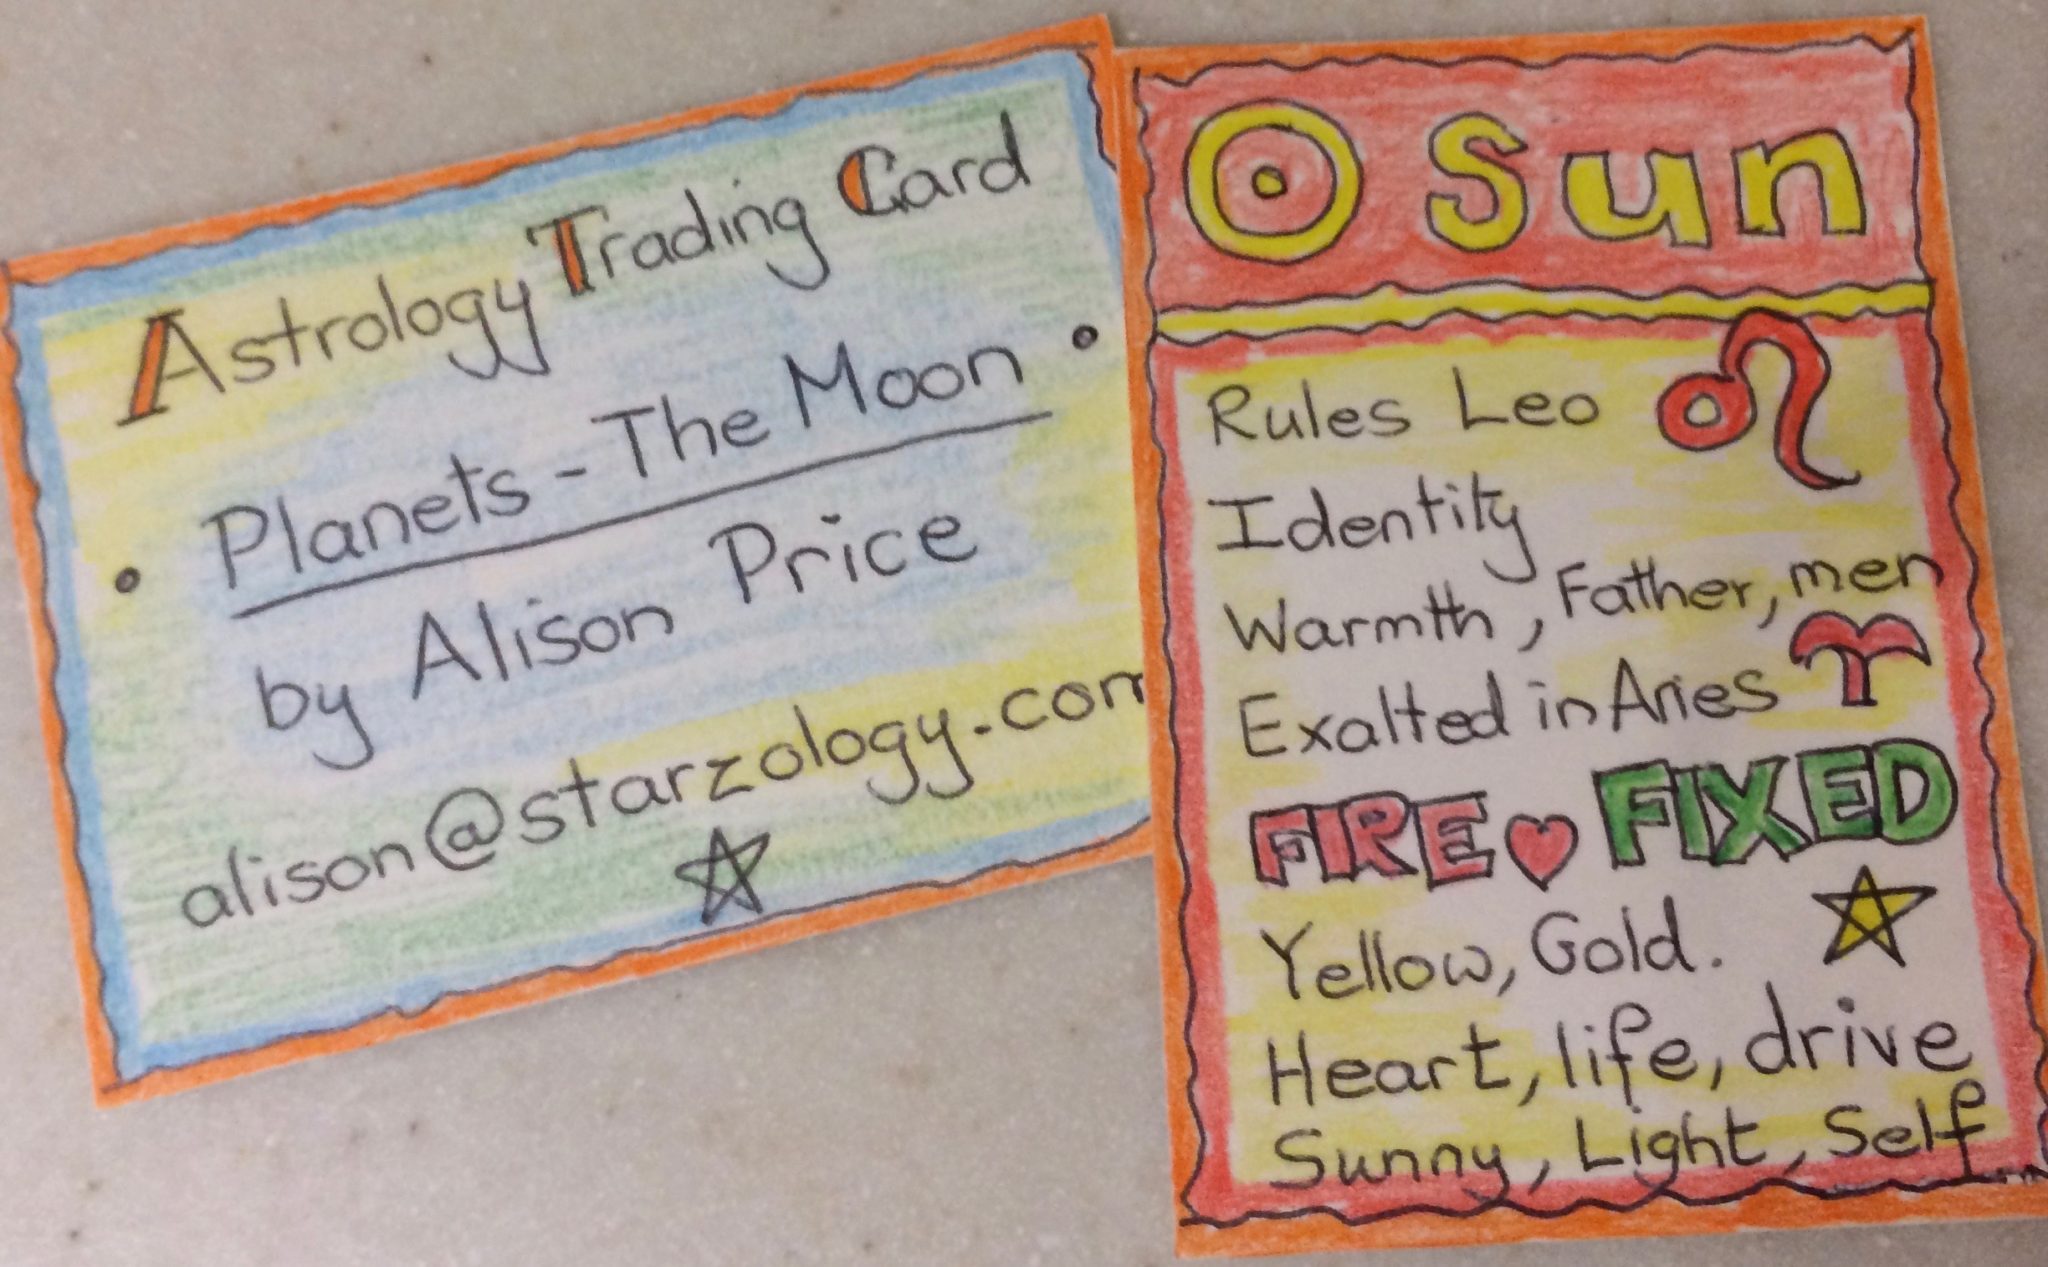 Astrology Trading Cards (ATC)